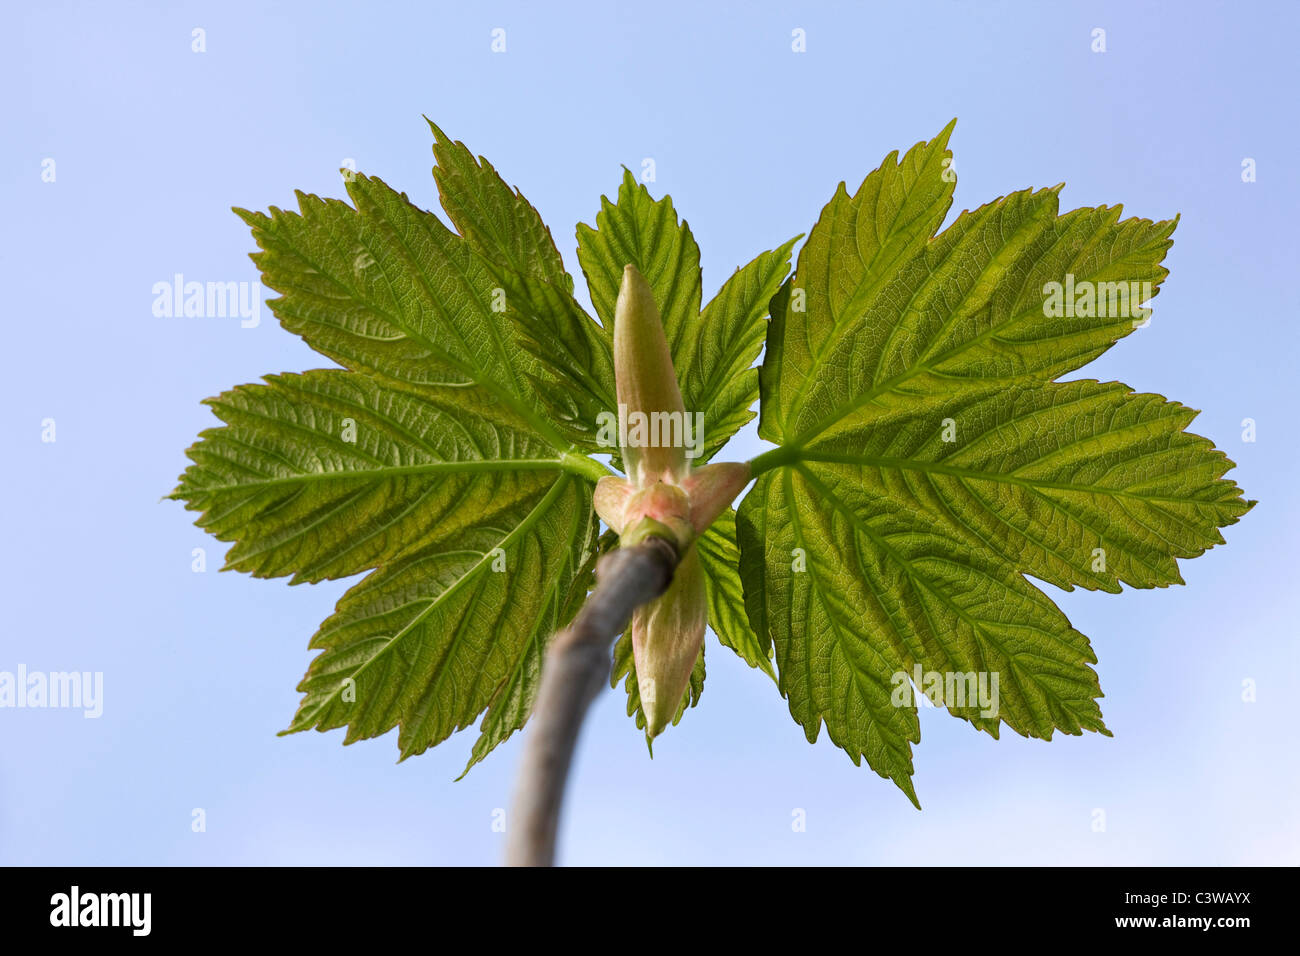 Sycamore Maple leaf buds opening (Acer pseudoplatanus) Stock Photo